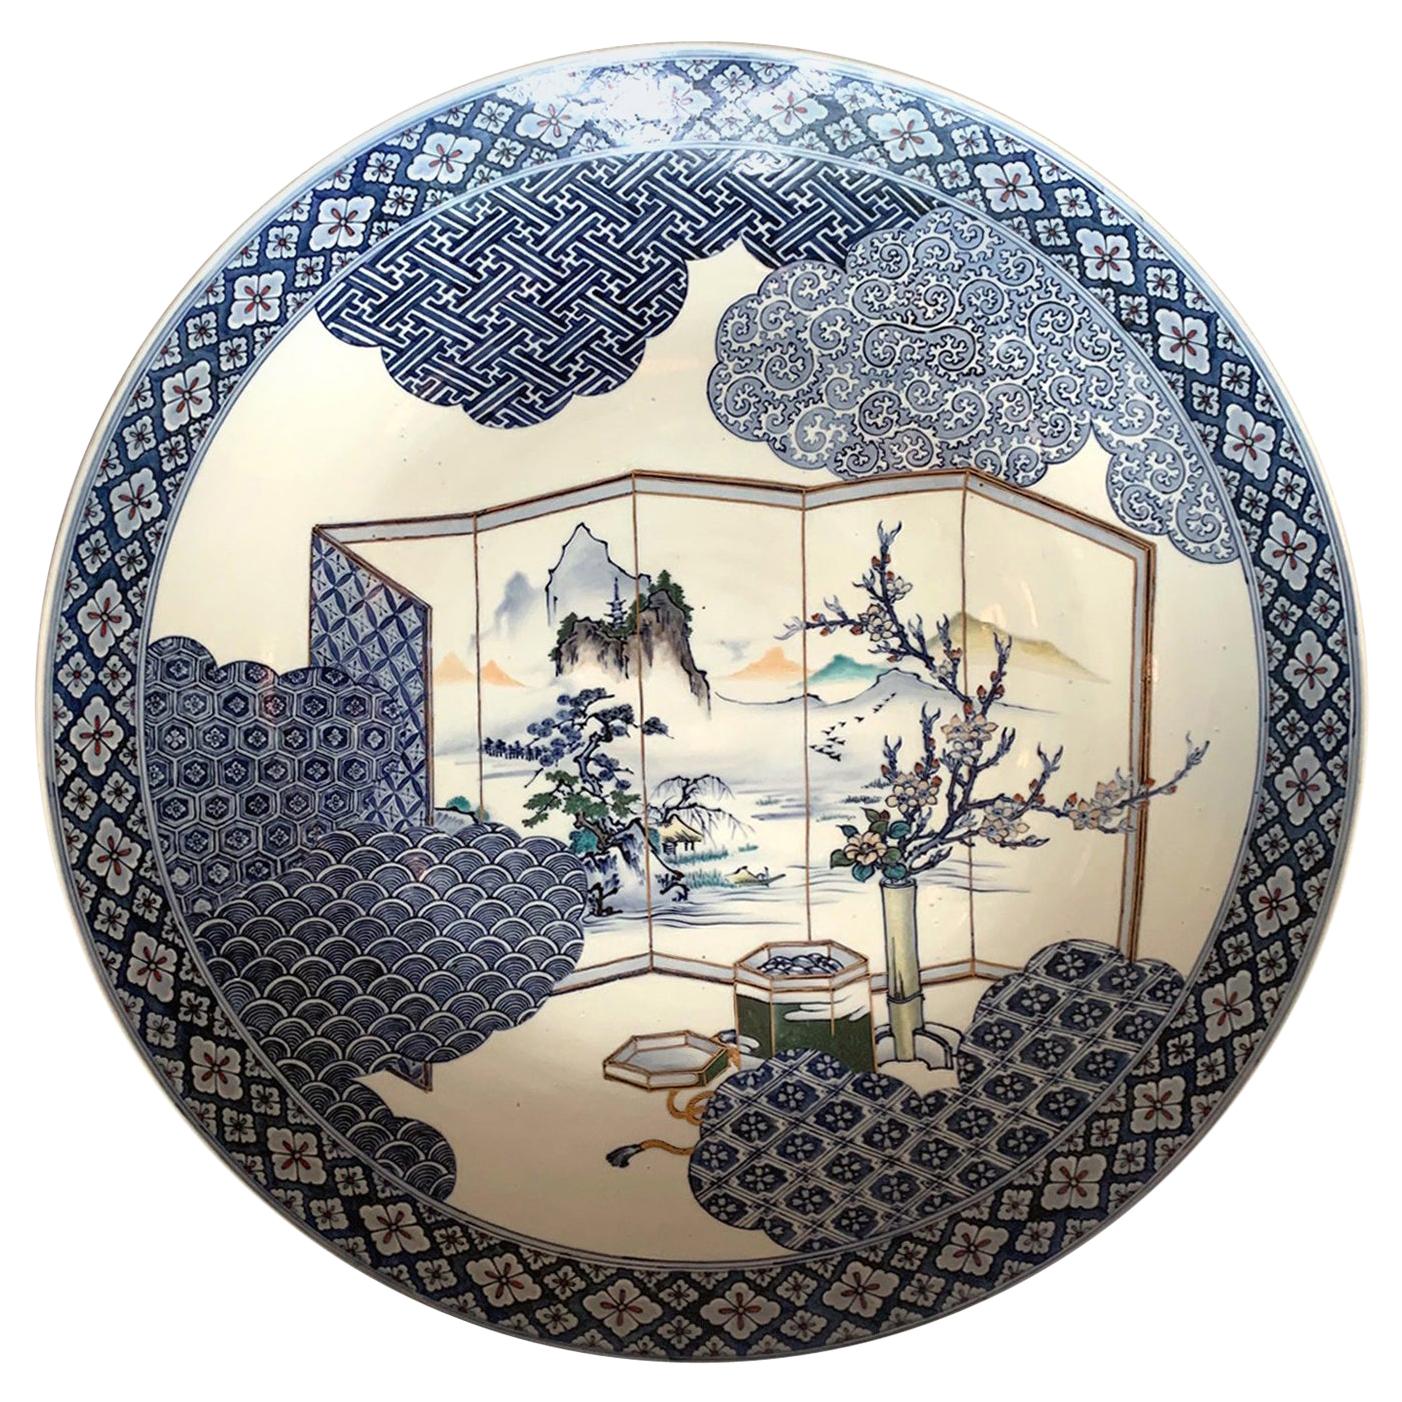 What is Japanese porcelain?